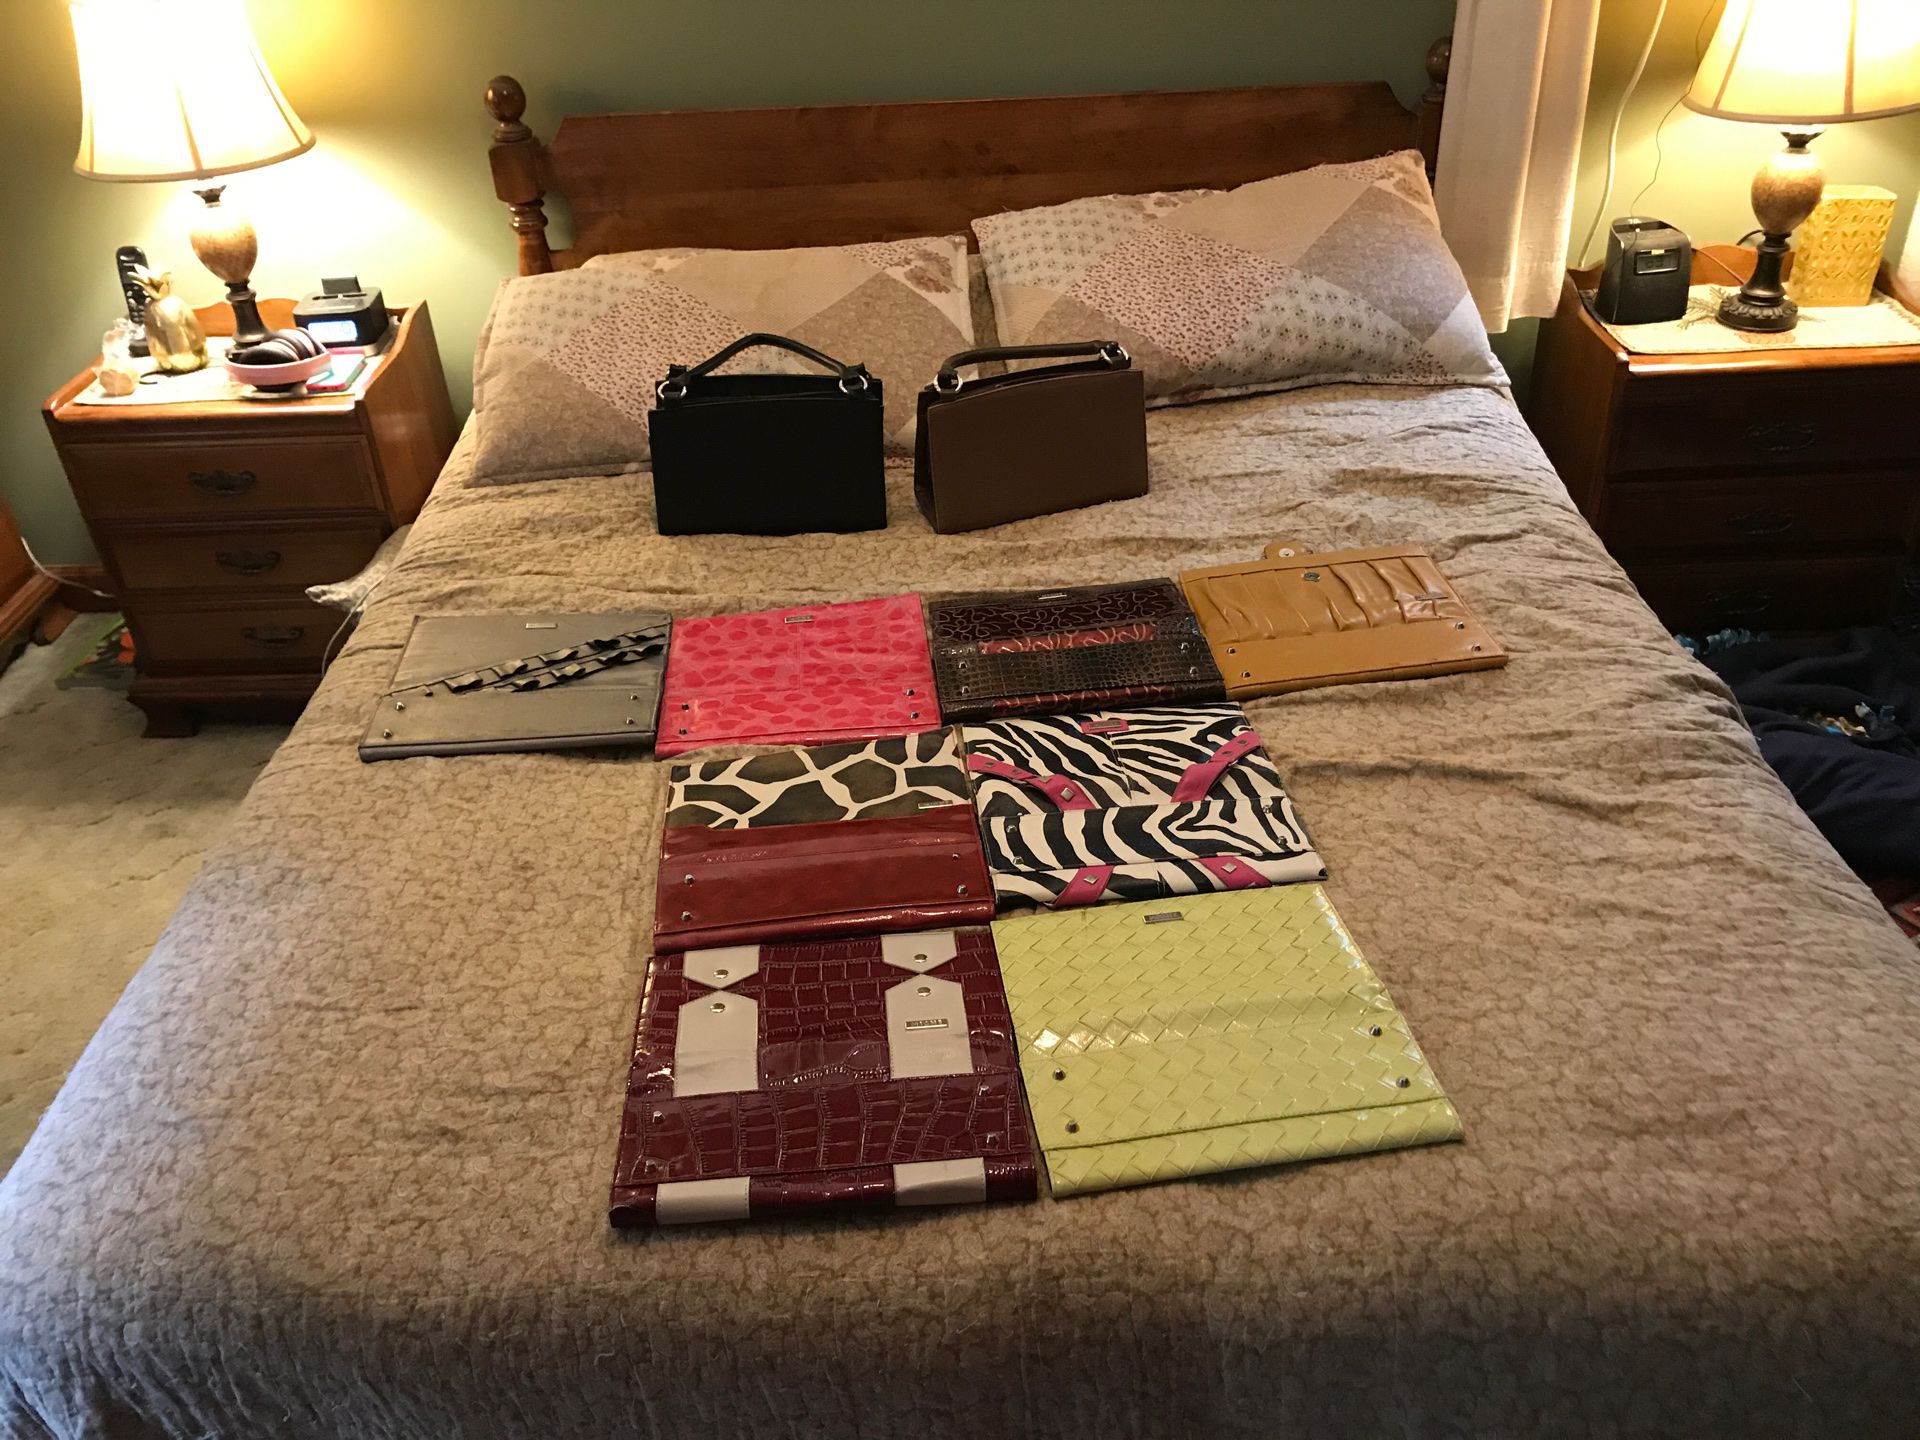 Miche Purses and magnetic covers